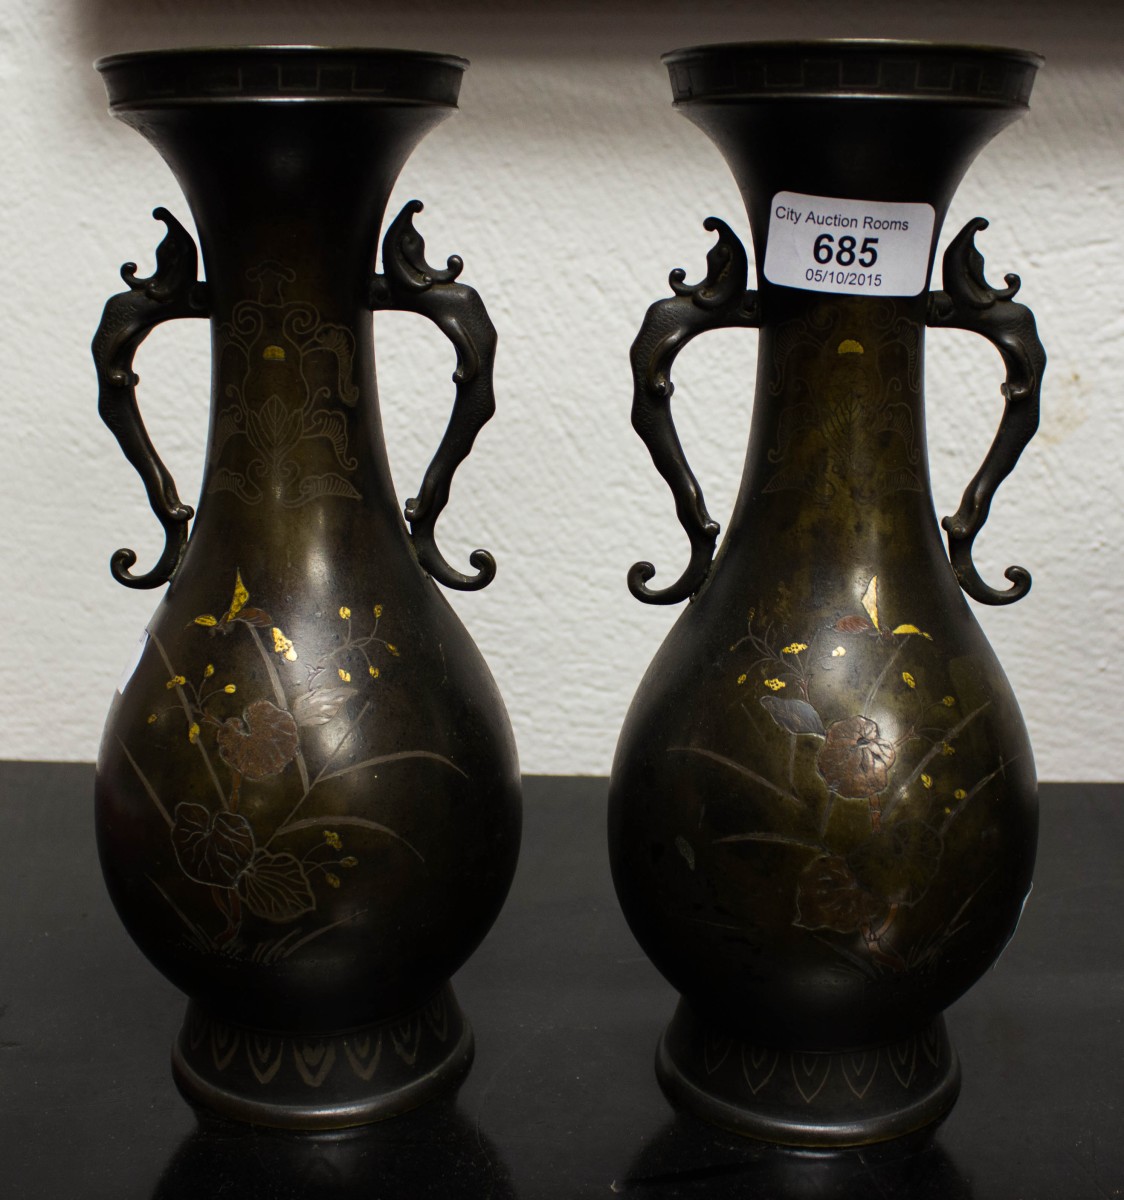 PAIR OF JAPANESE SHIBYAMA BRONZE VASES INLAID WITH GOLD & SILVER